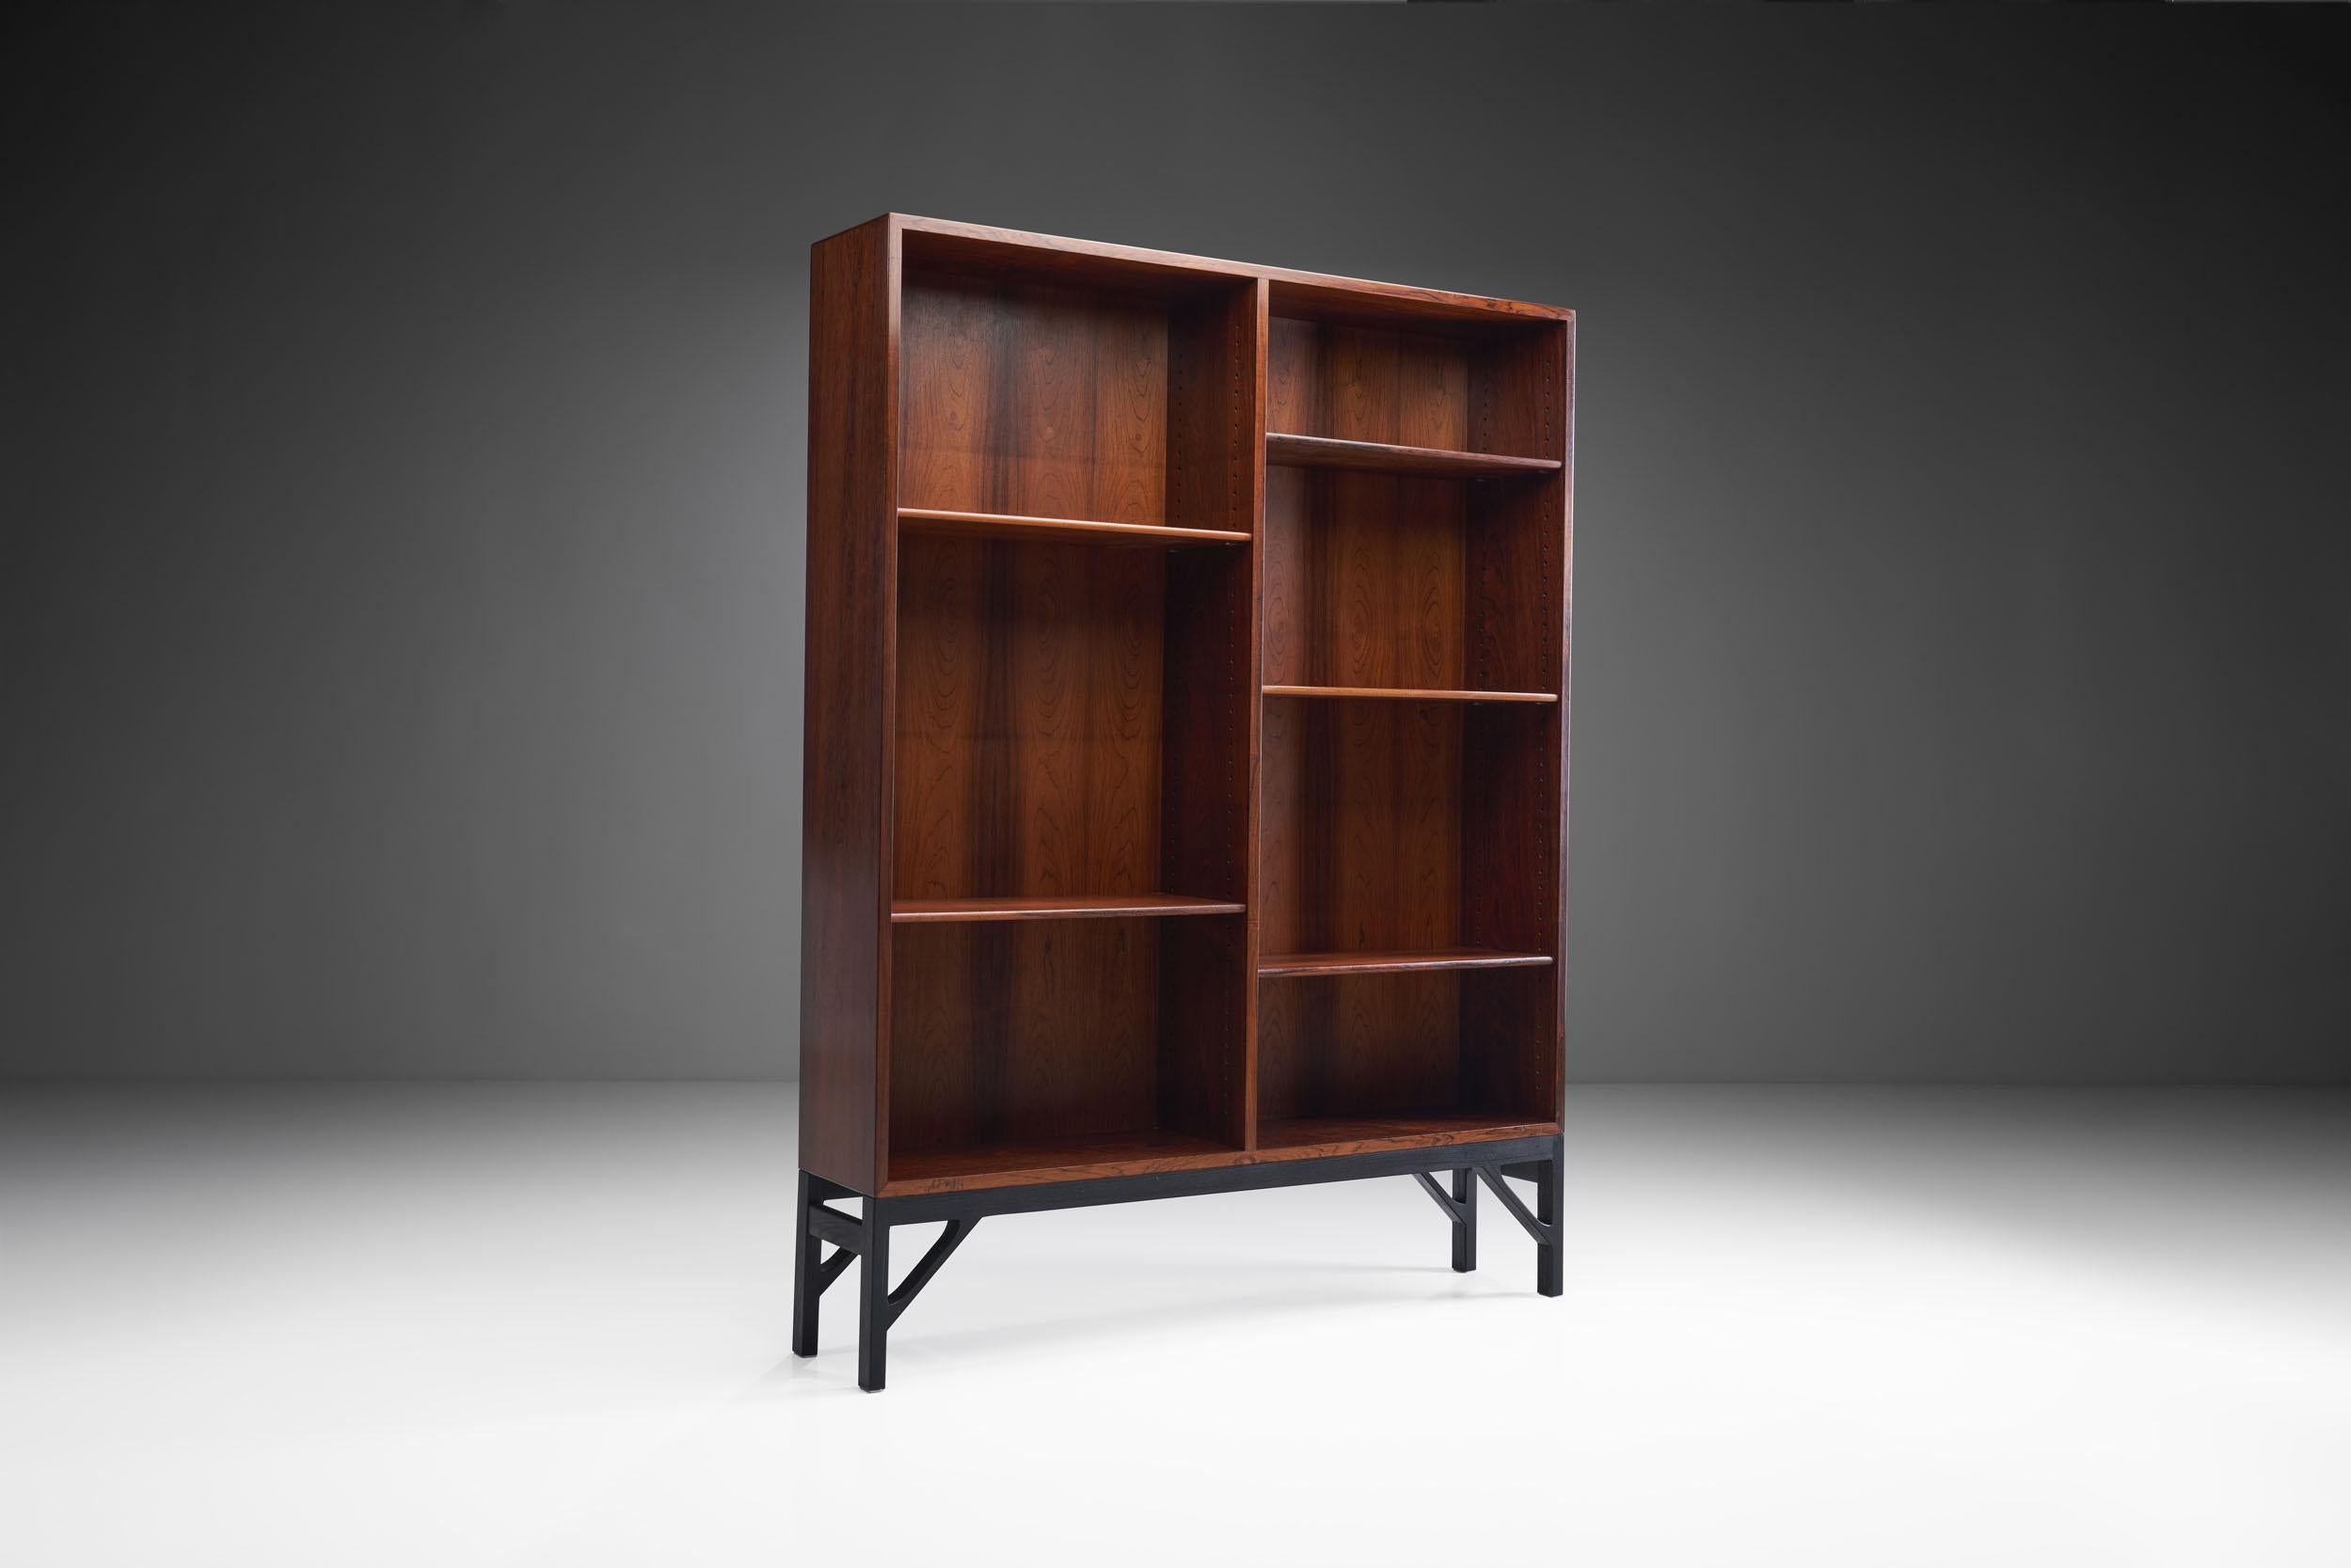 Two Bookcases by Børge Mogensen for C. M. Madsen, Denmark, 1950s For Sale 1